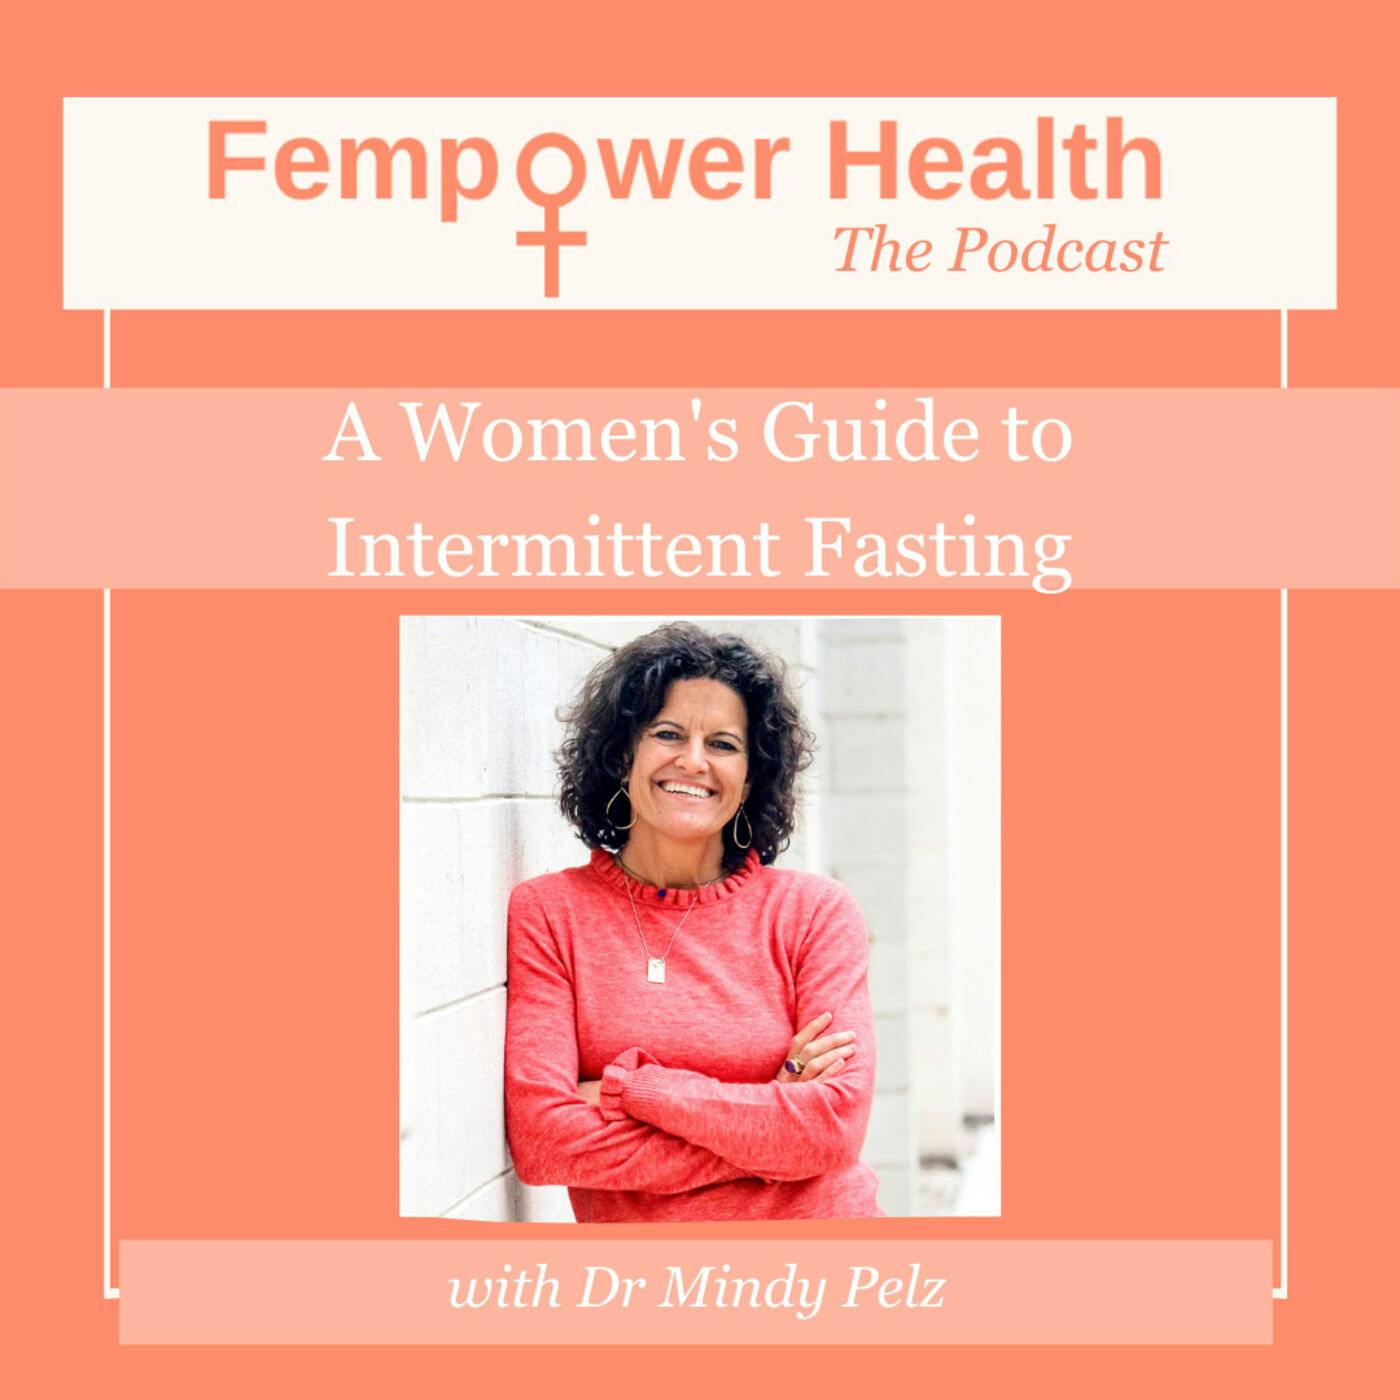 A Woman's Guide to Intermittent Fasting | Dr Mindy Pelz